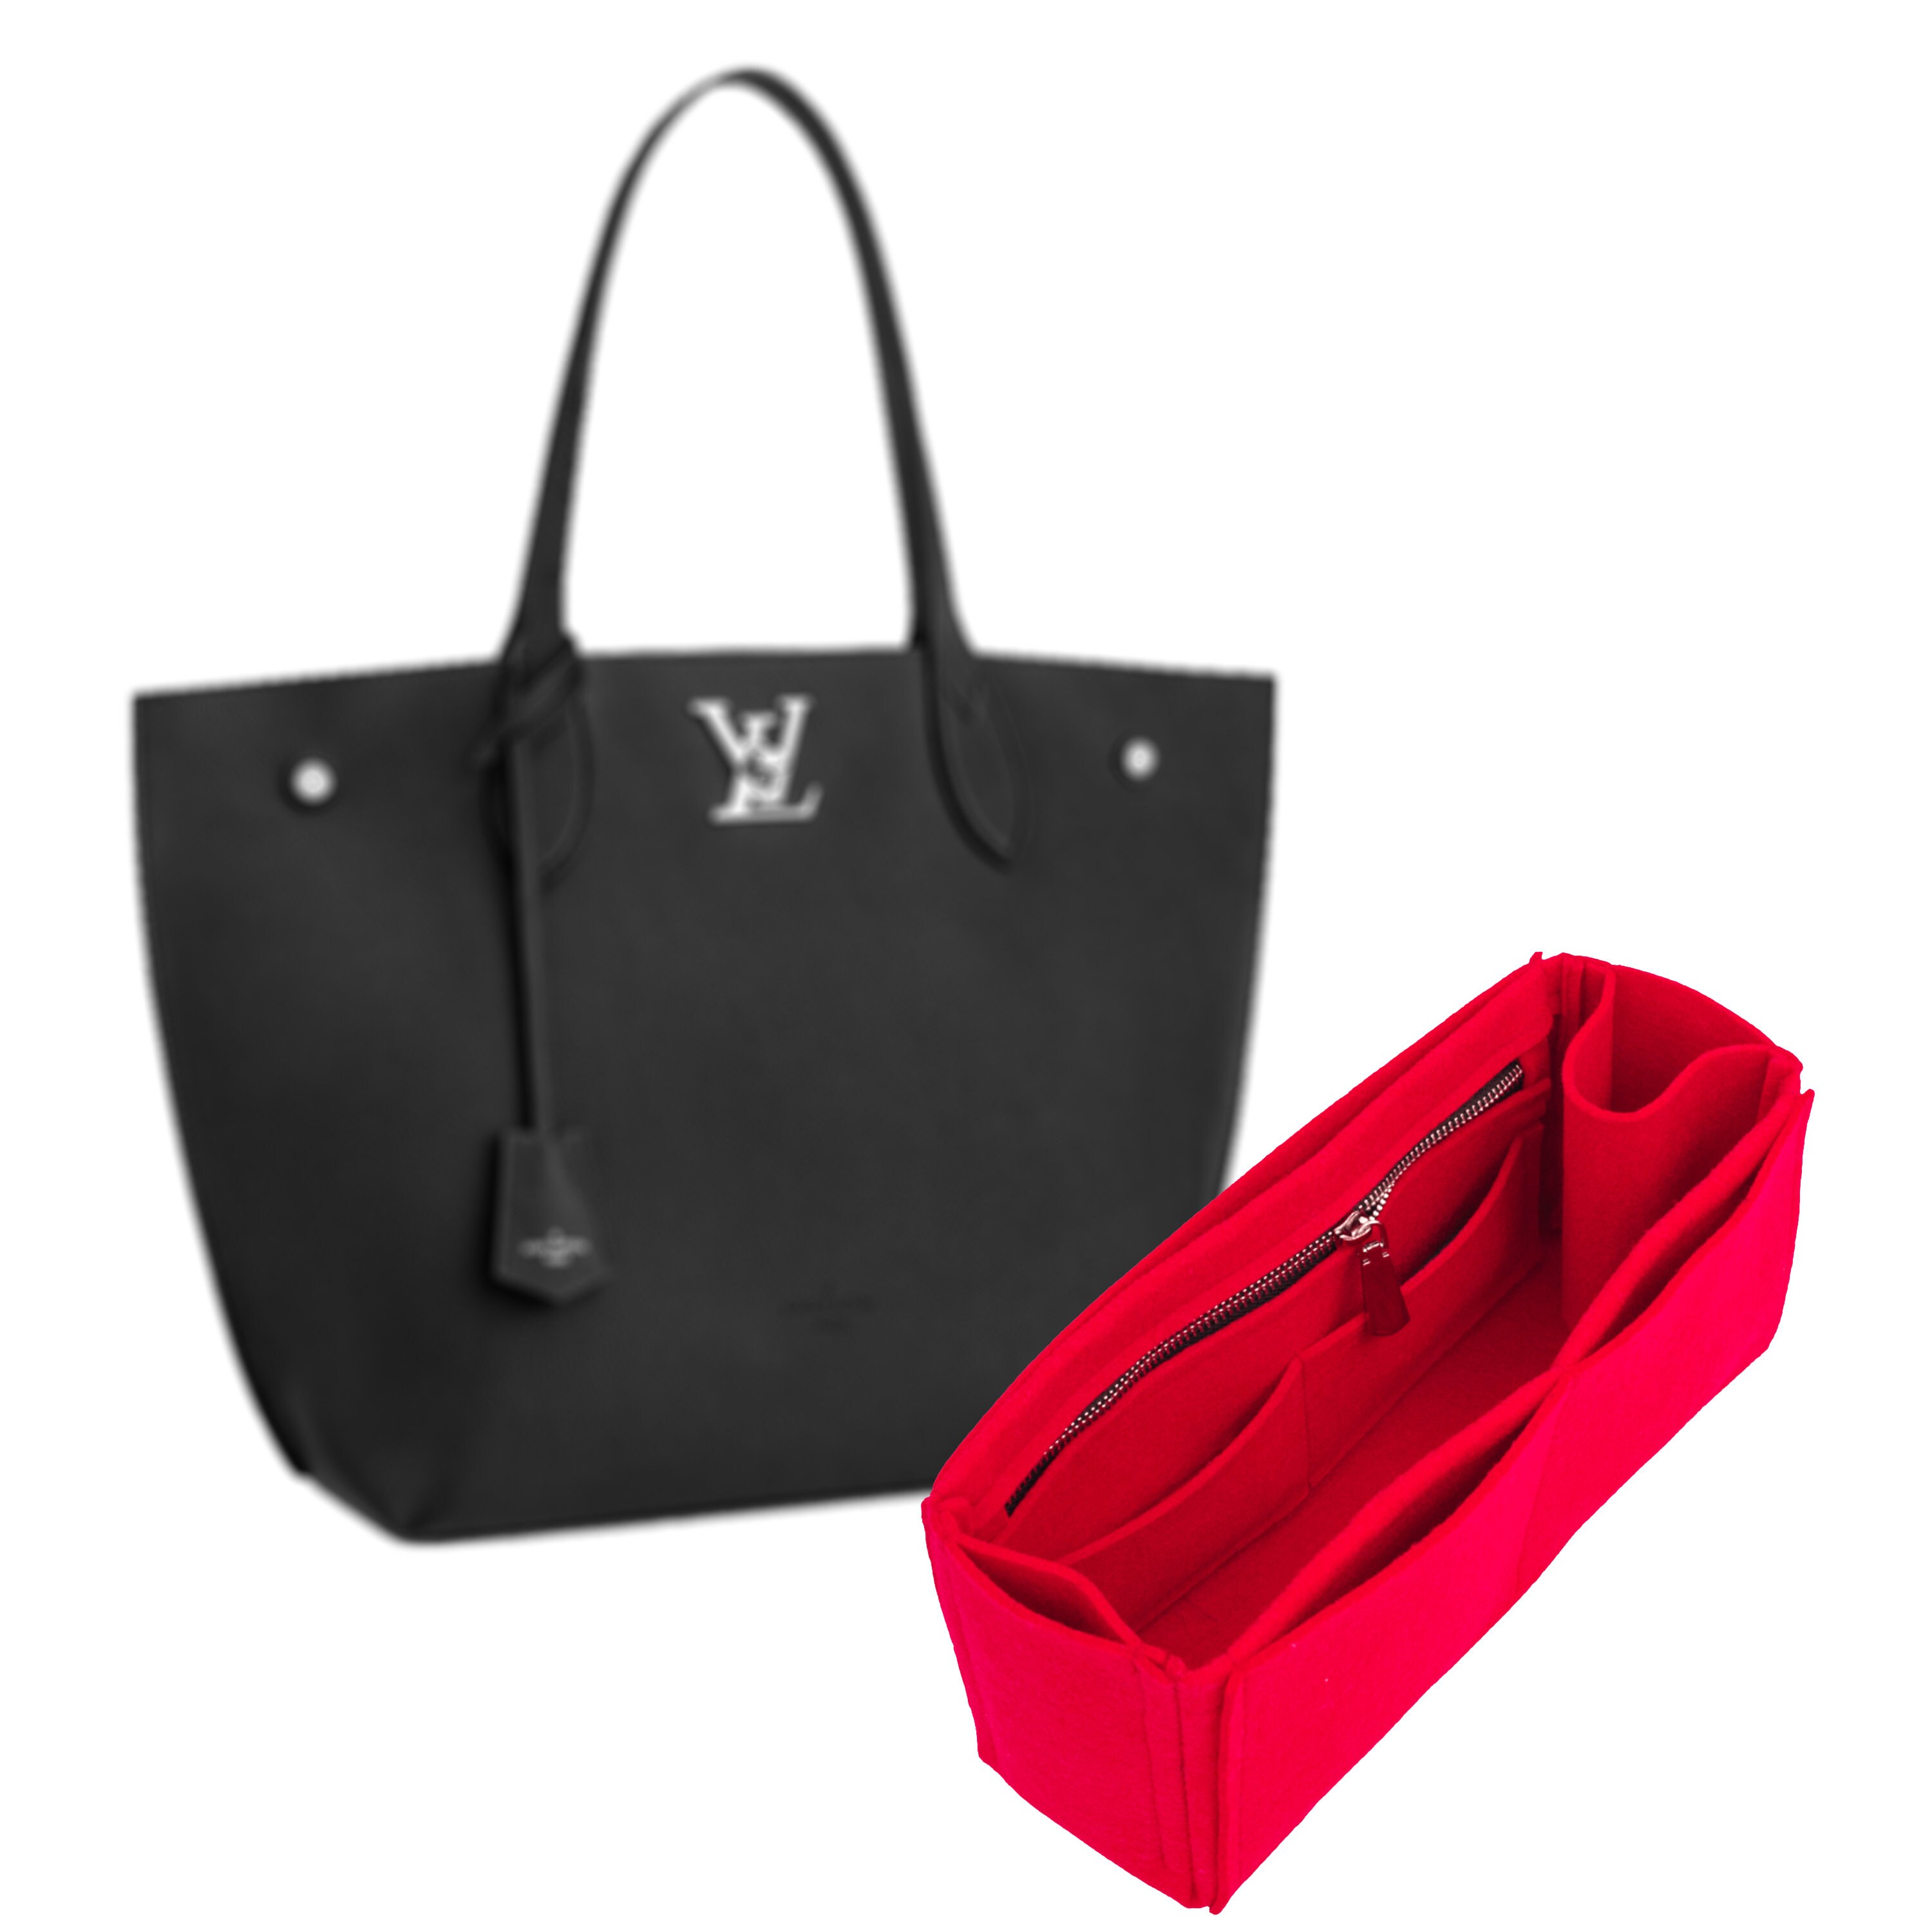 tote bag liner insert for louis vuitton mm on the go tote